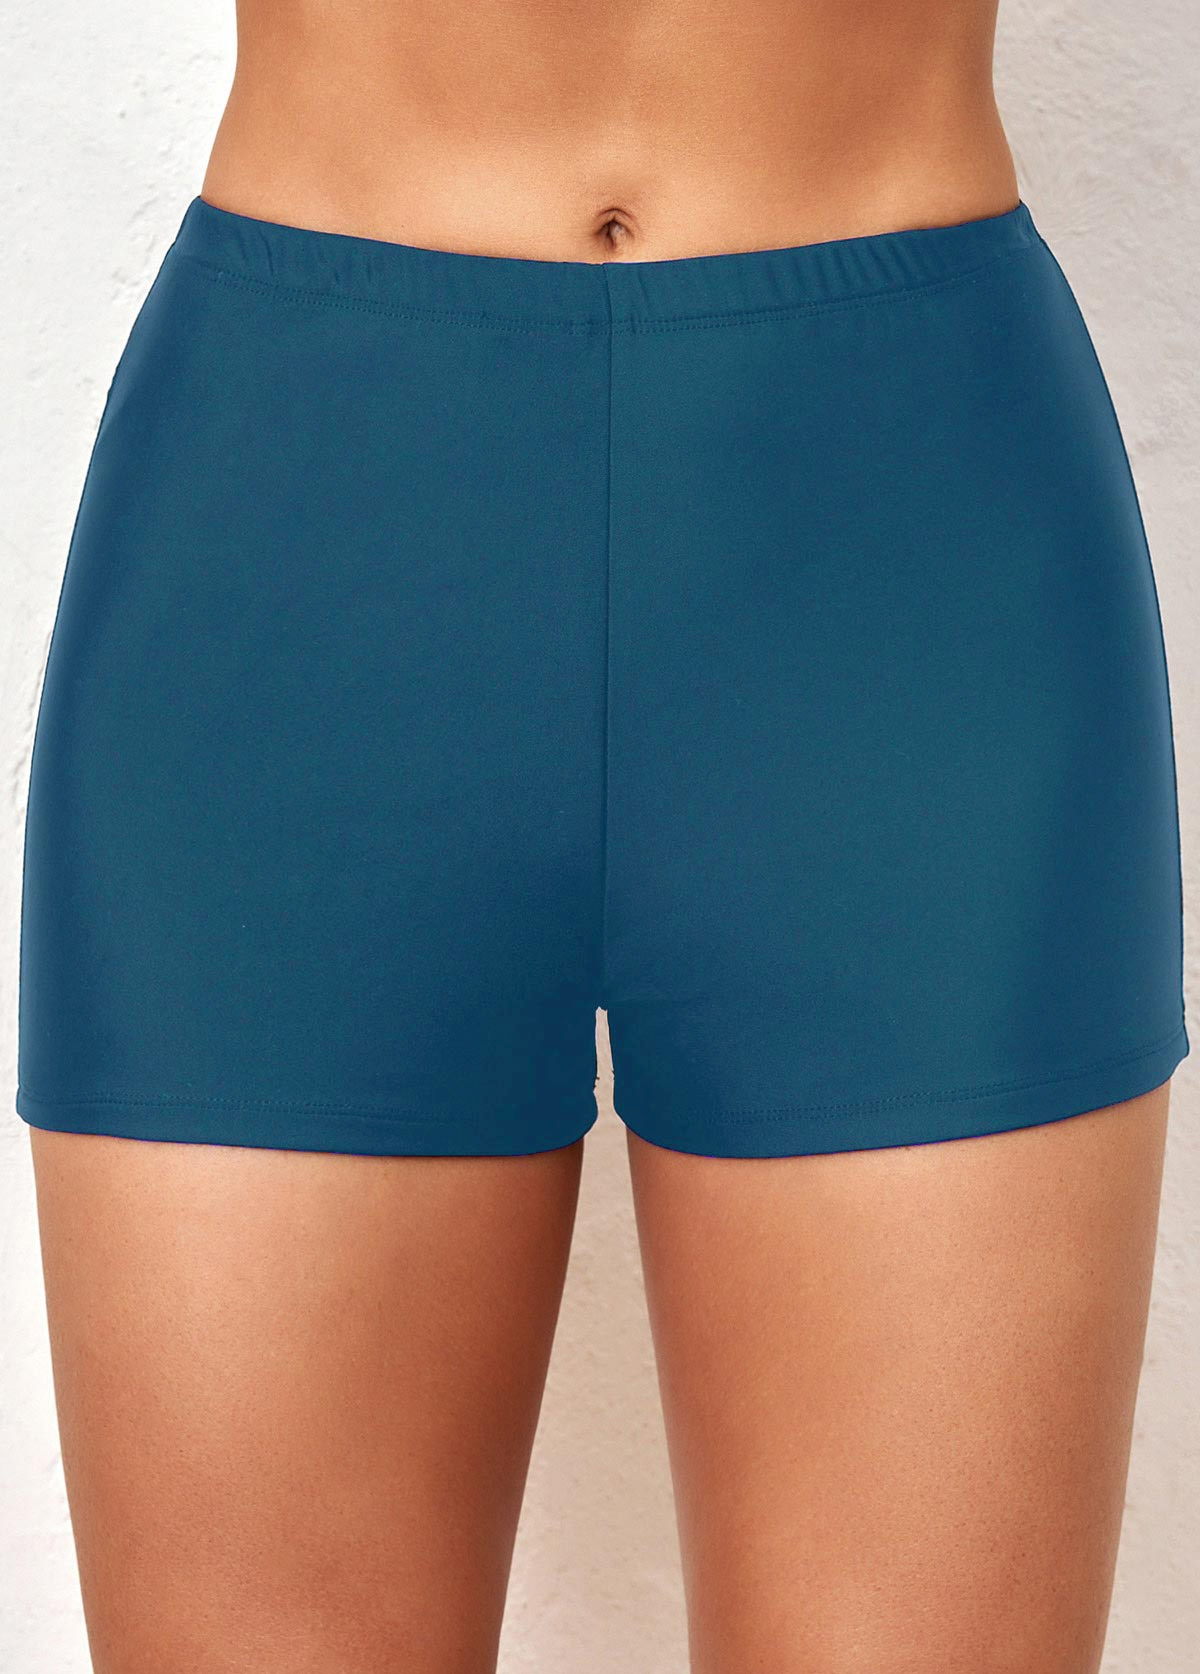 Mid Waisted Peacock Blue Stretch Swim Shorts